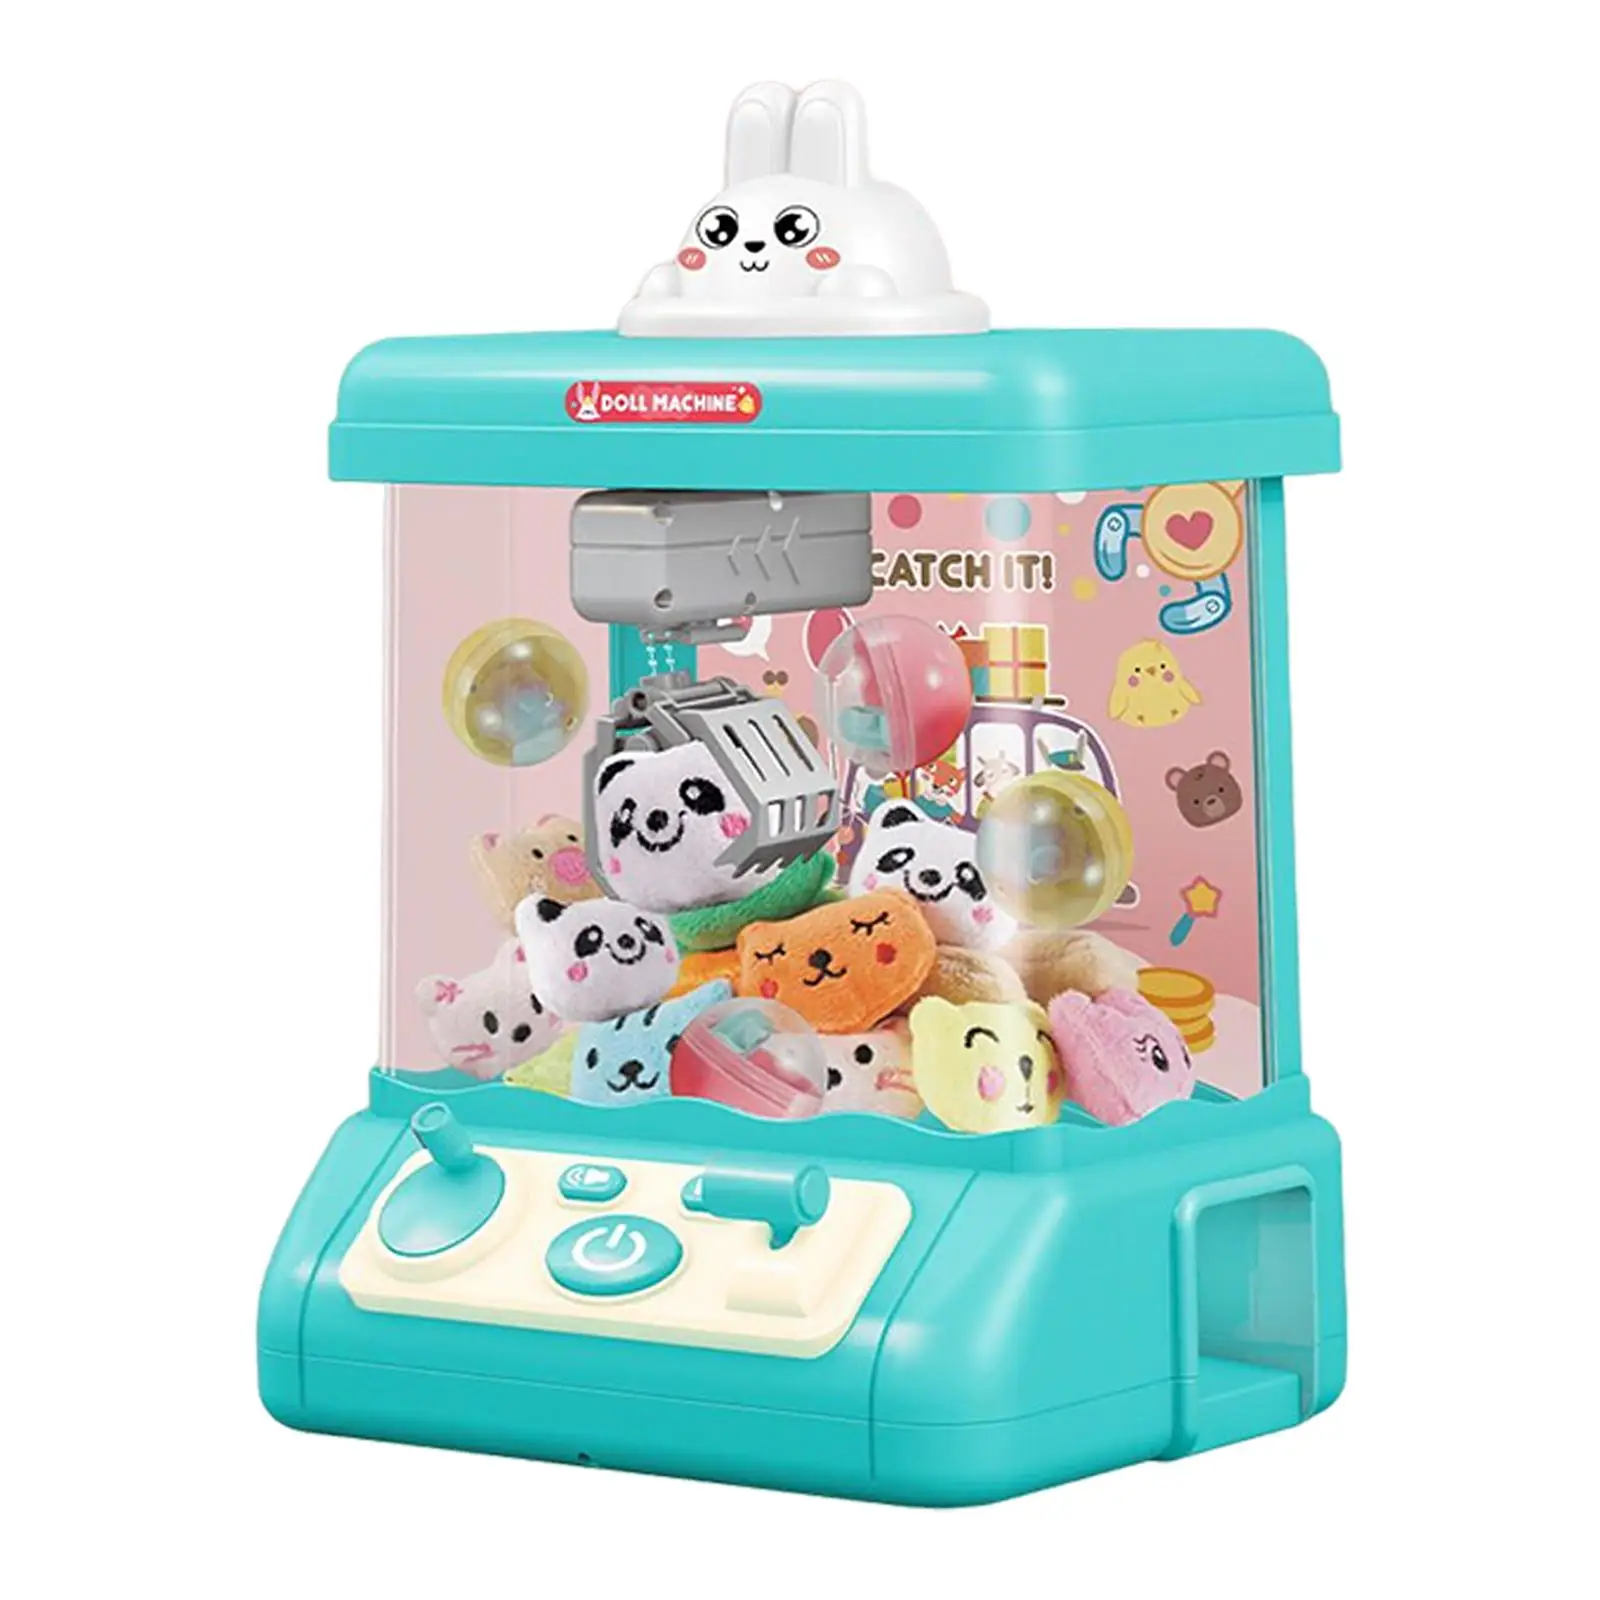 Small Claw Machine with Lights and Sound Miniature Doll Machine diy Catching Doll Machine Slot Machine for Birthday Gifts